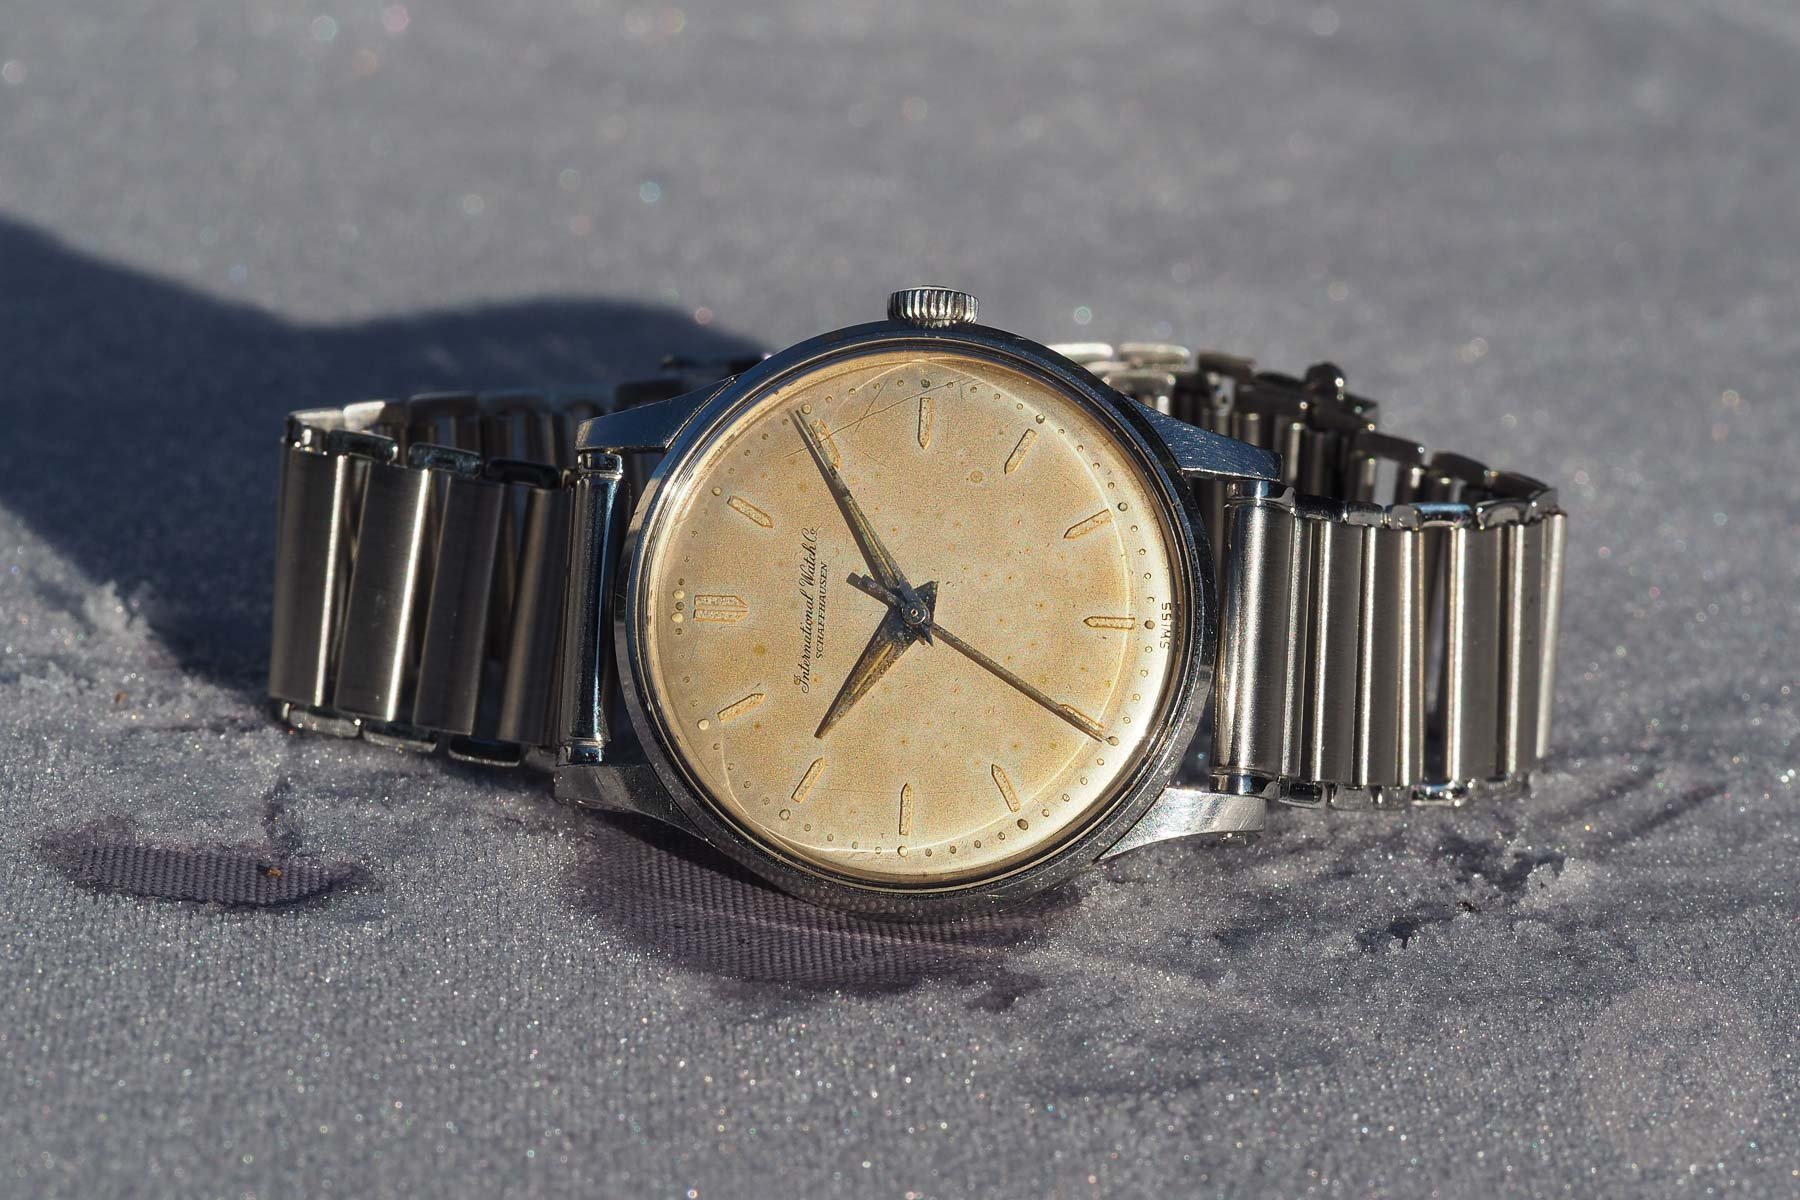 Vintage Watches: The IWC 309 Brings Calatrava Looks At A Fraction Of The Price